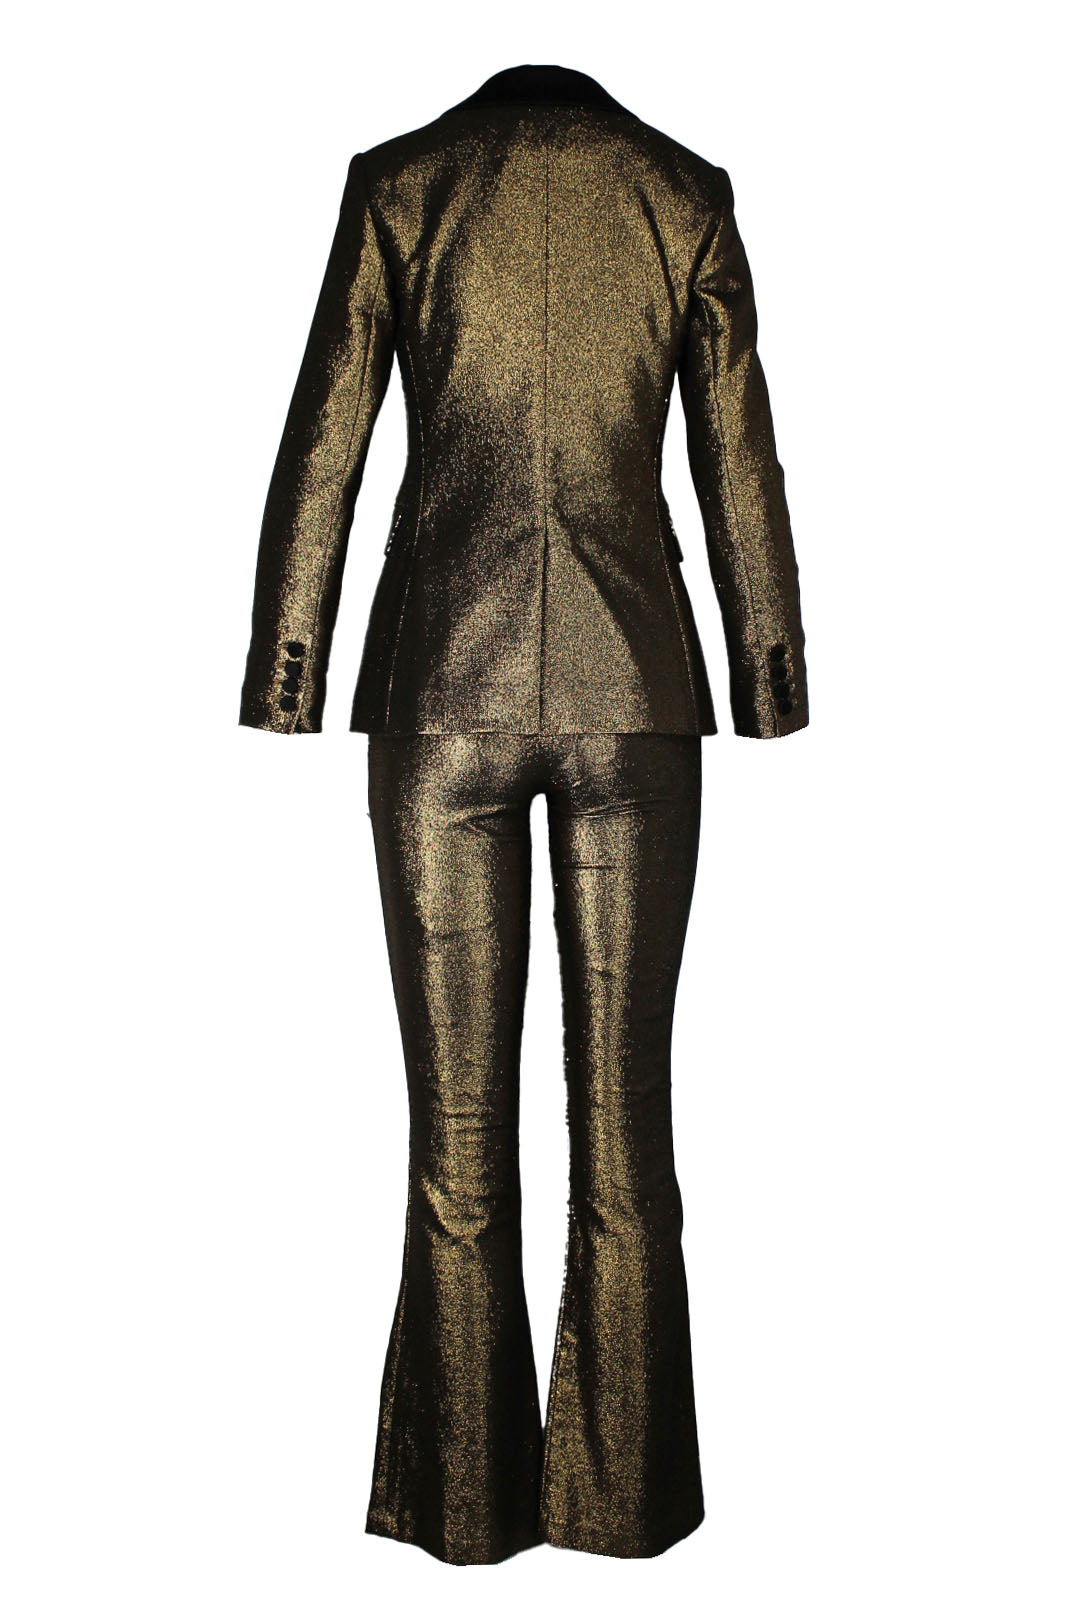 alice + olivia metallic gold 2 piece suit. jacket features front flap pockets, single button closure, and 4 cuff buttons. pants are mid-rise, wide leg and taper out towards hem with back zipper.